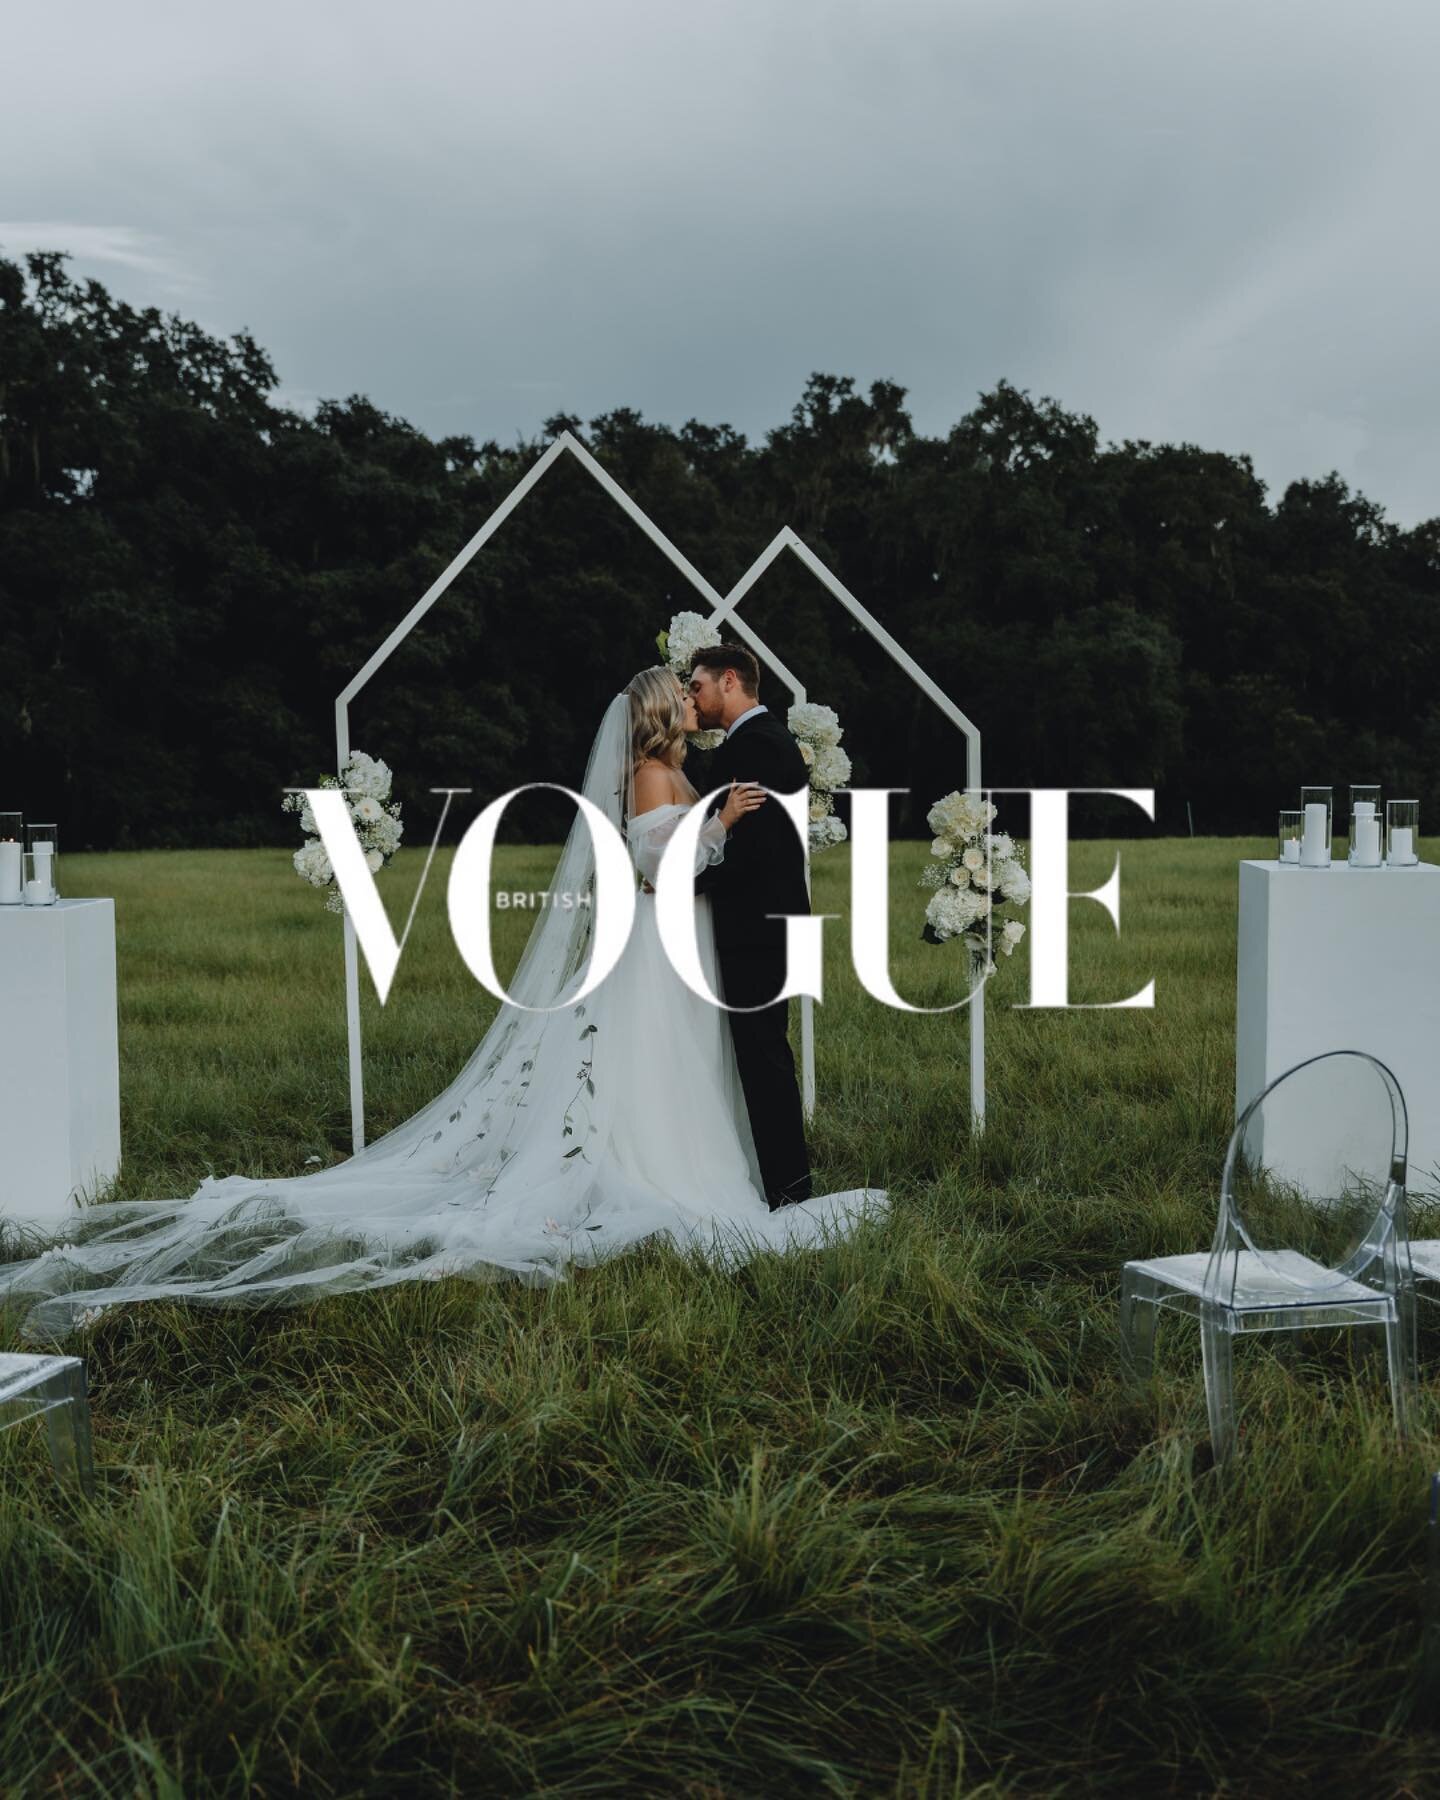 ✨Friends and family, I have exciting news that I have been waiting to share for 2 months!!✨

 I am so proud and honored to have been asked by @britishvogue to be showcased in their exclusive wedding campaign in April, May, and June of 2023!! I I was 